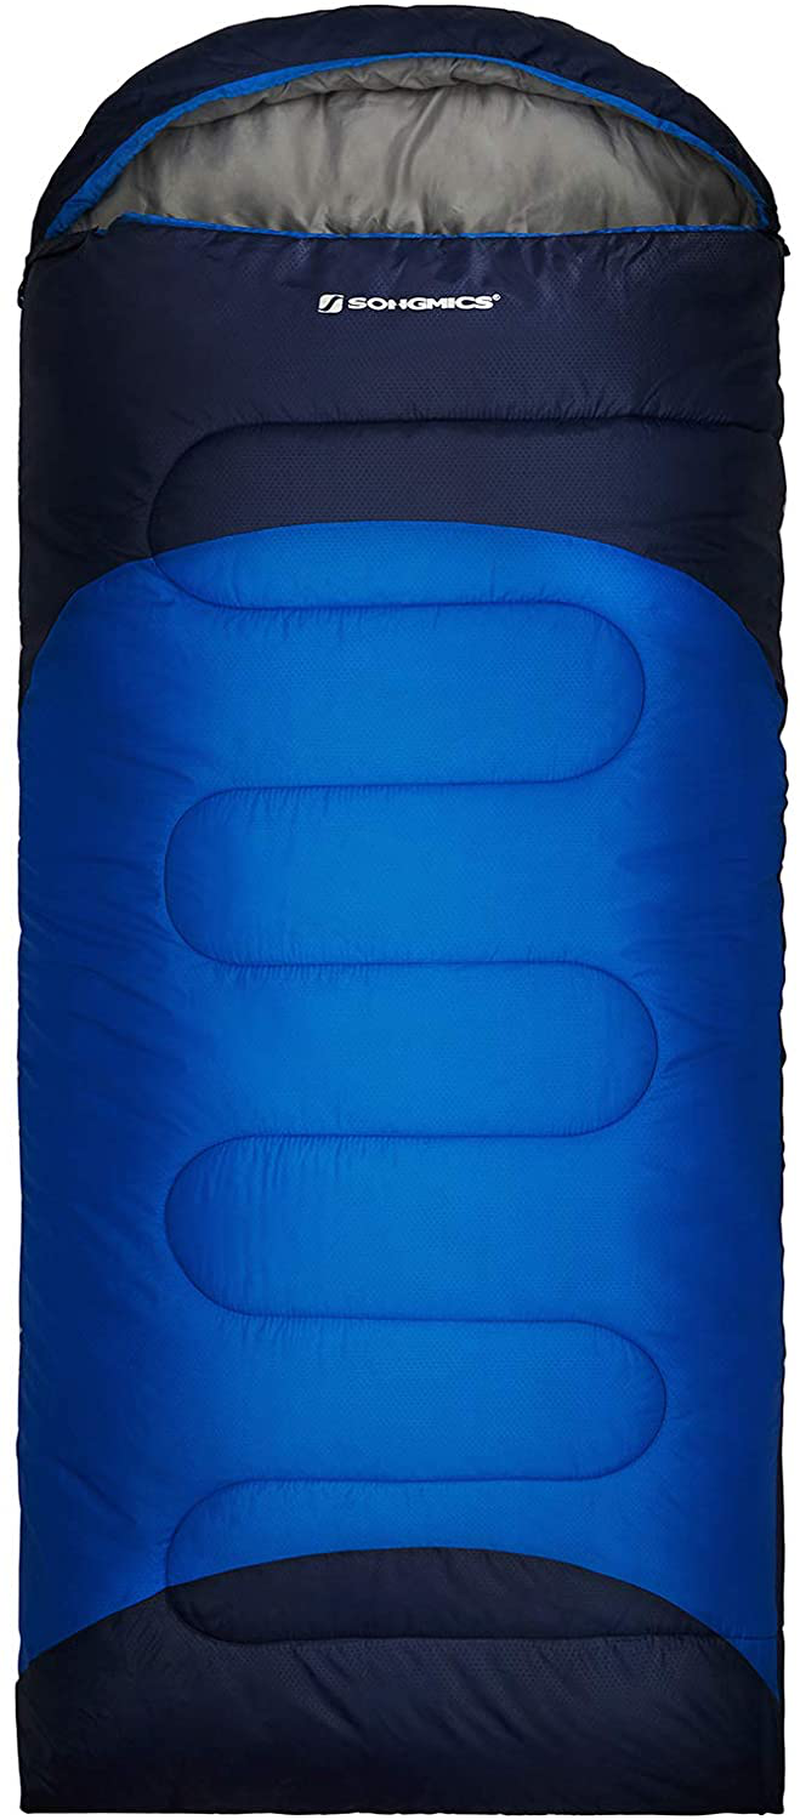 SONGMICS Camping Sleeping Bag for Adults Teens, Backpacking Hiking Traveling, Warm and Cold Weather 3 Seasons, Compact Lightweight Waterproof, Indoor and Outdoor, with Compression Sack